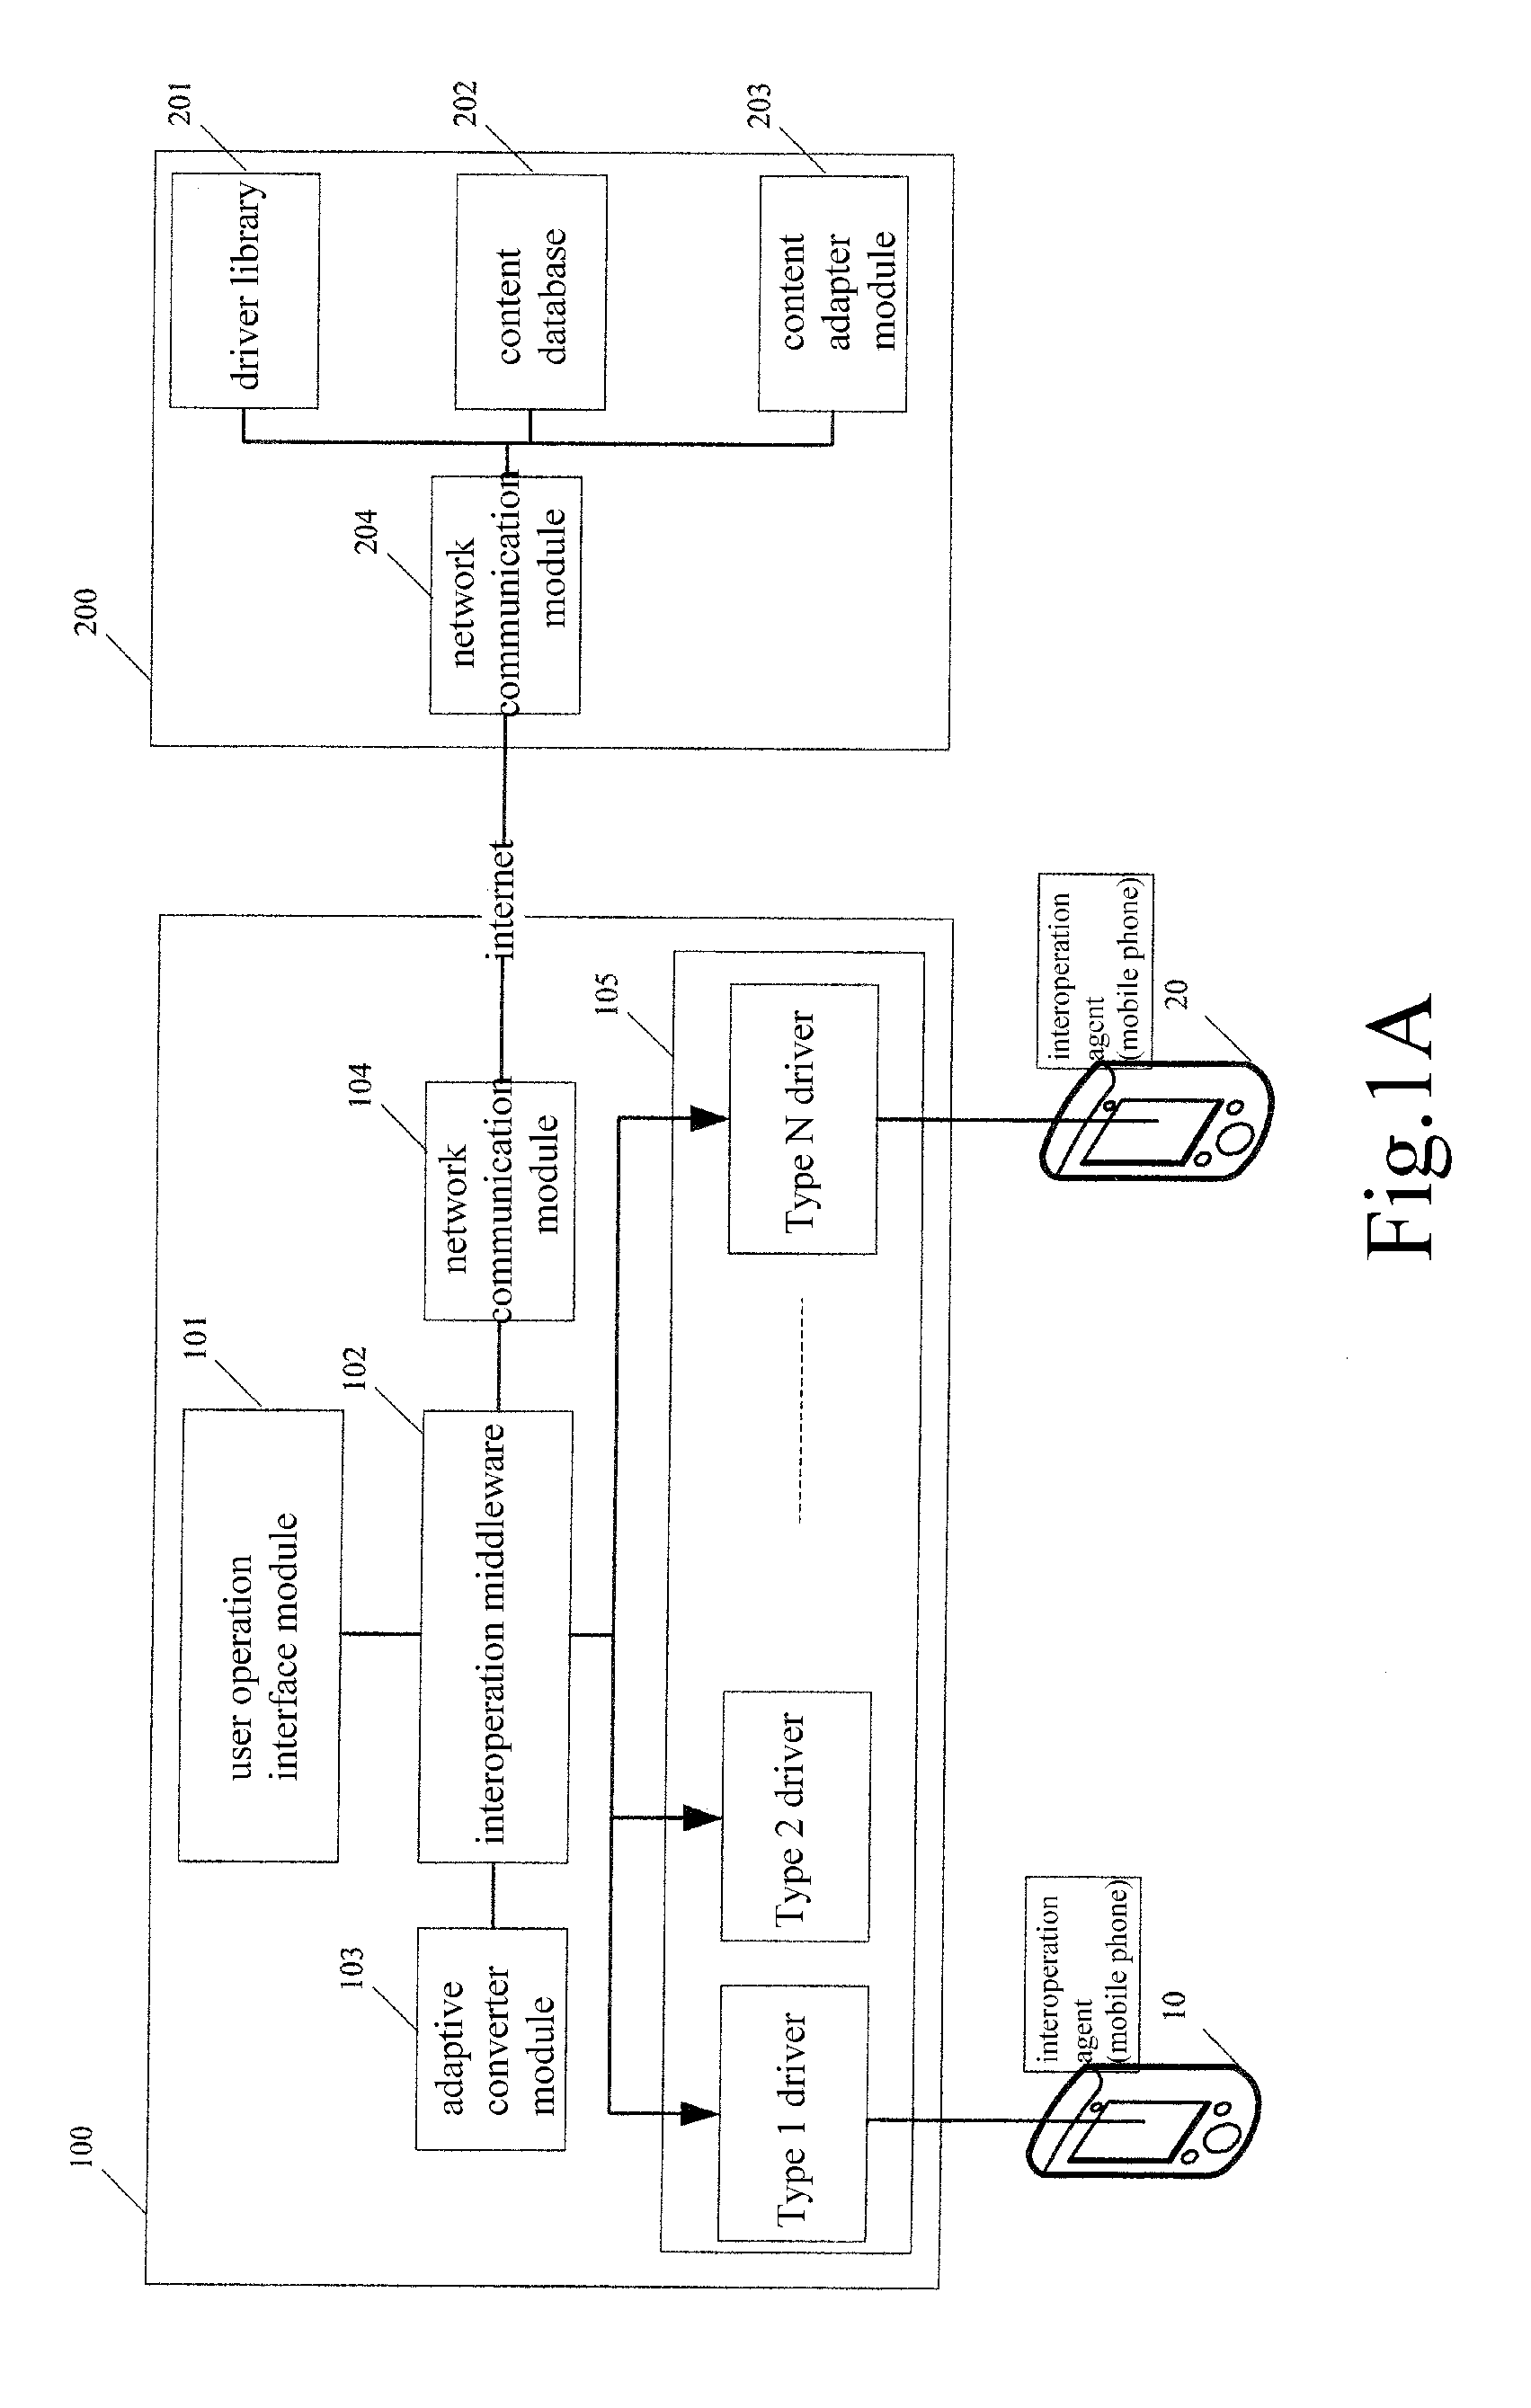 Method and system for interactive operation between mobile phone and PC based on a middleware